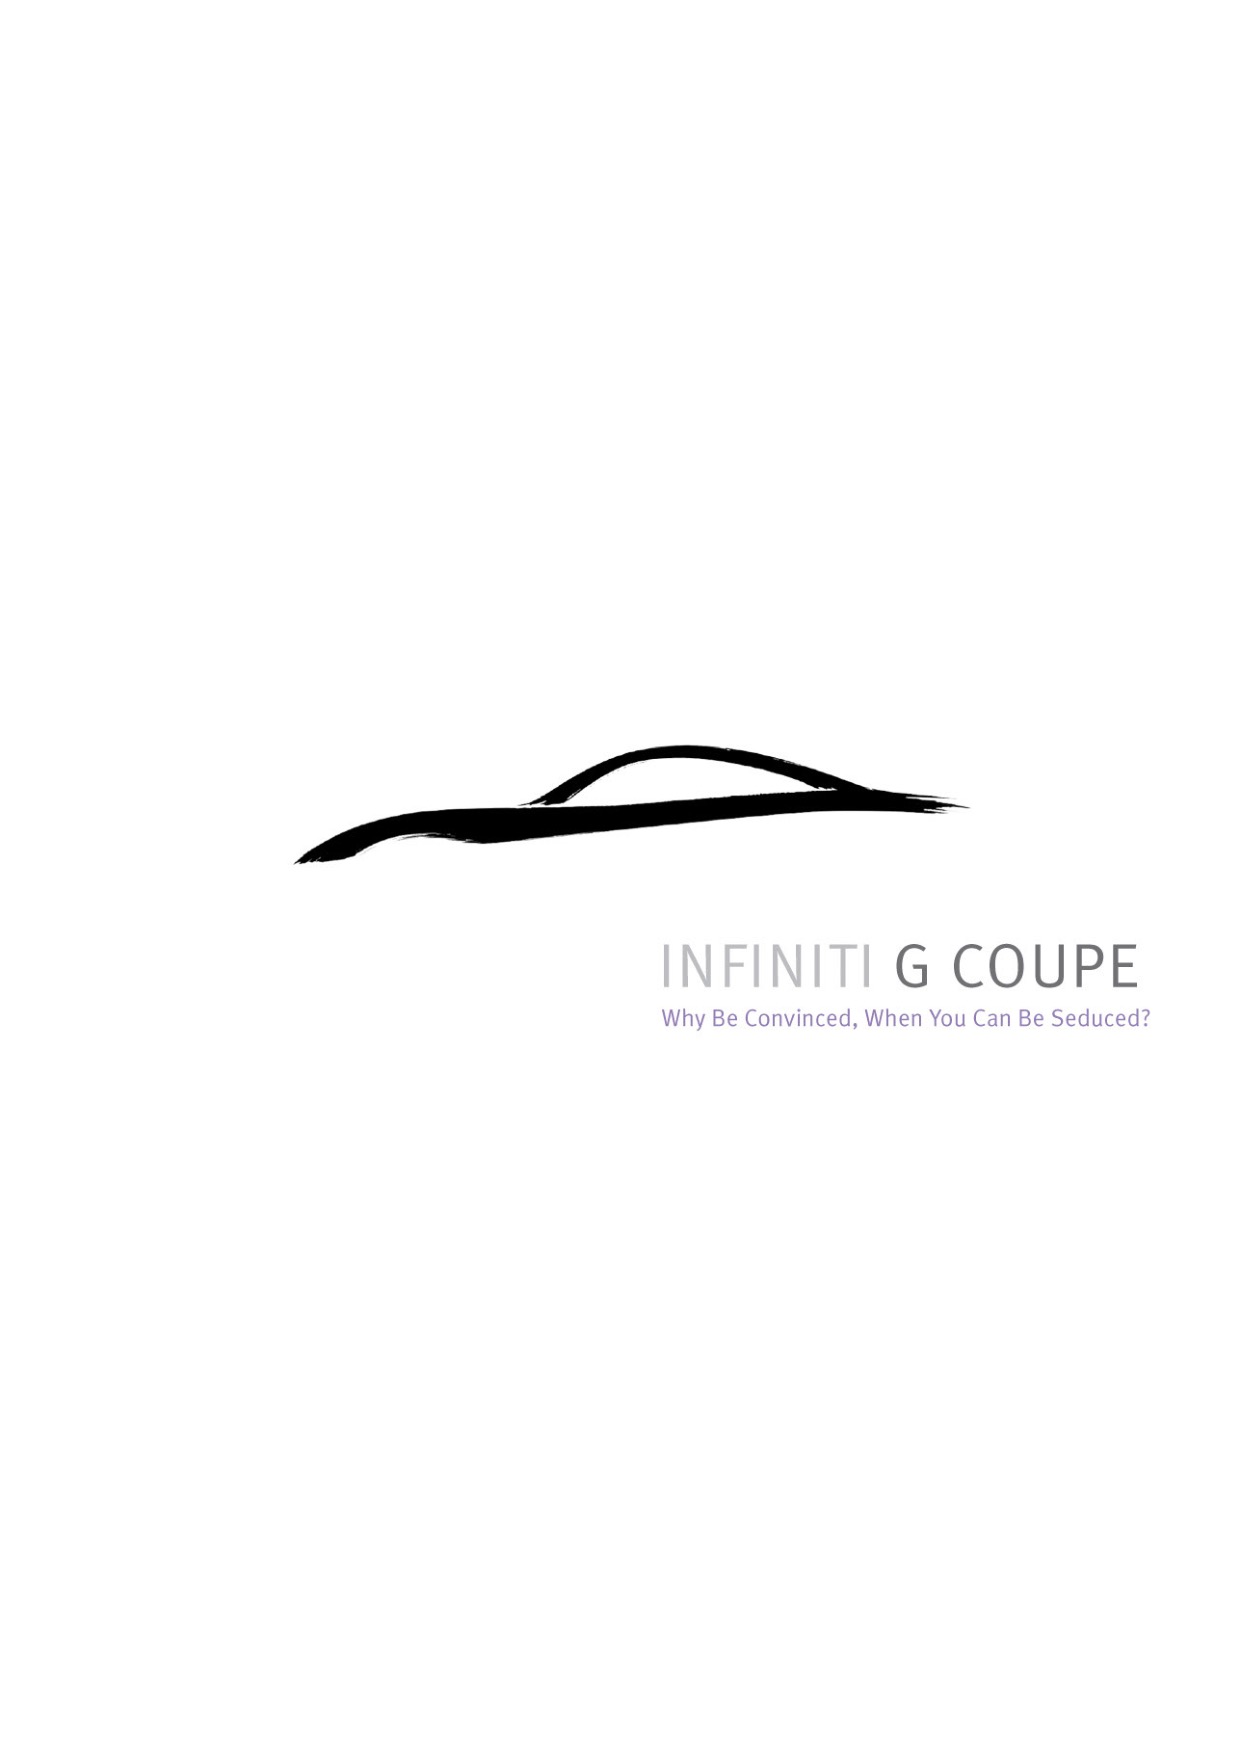 2012 Infiniti G Coupe Brochure Page 1